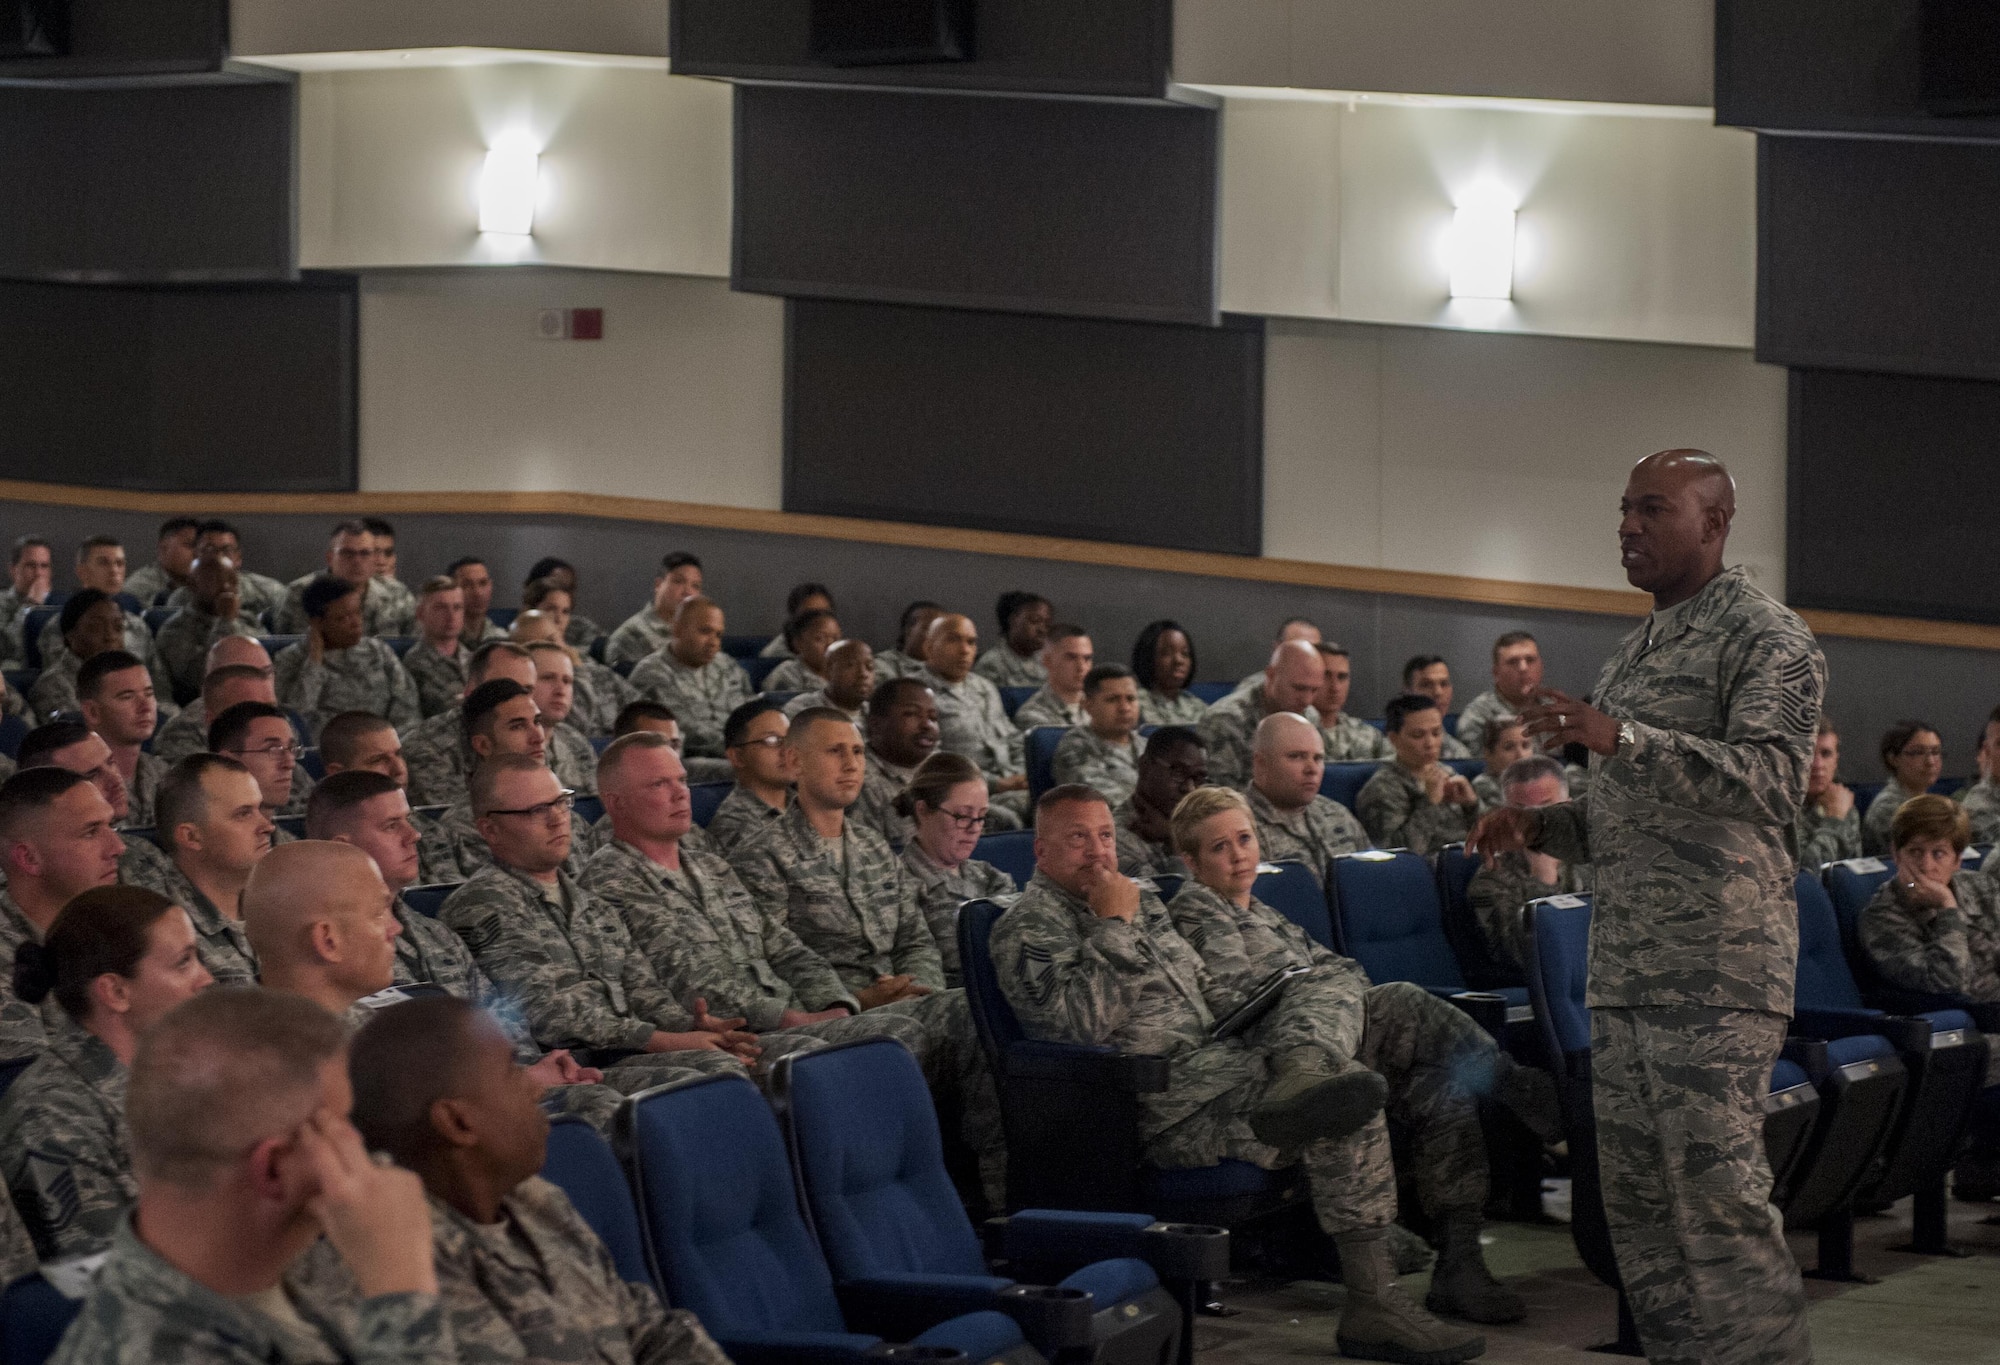 Chief Master Sgt. of the Air Force Kaleth O. Wright speaks to members of the Wolf Pack during an all call briefing at Kunsan Air Base, Republic of Korea, June 6, 2017. Wright traveled to Kunsan to meet with airmen and discuss his focus areas as CMSAF as well as the Air Force mission throughout the Pacific region. (U.S. Air Force photo by Senior Airman Colville McFee/Released)